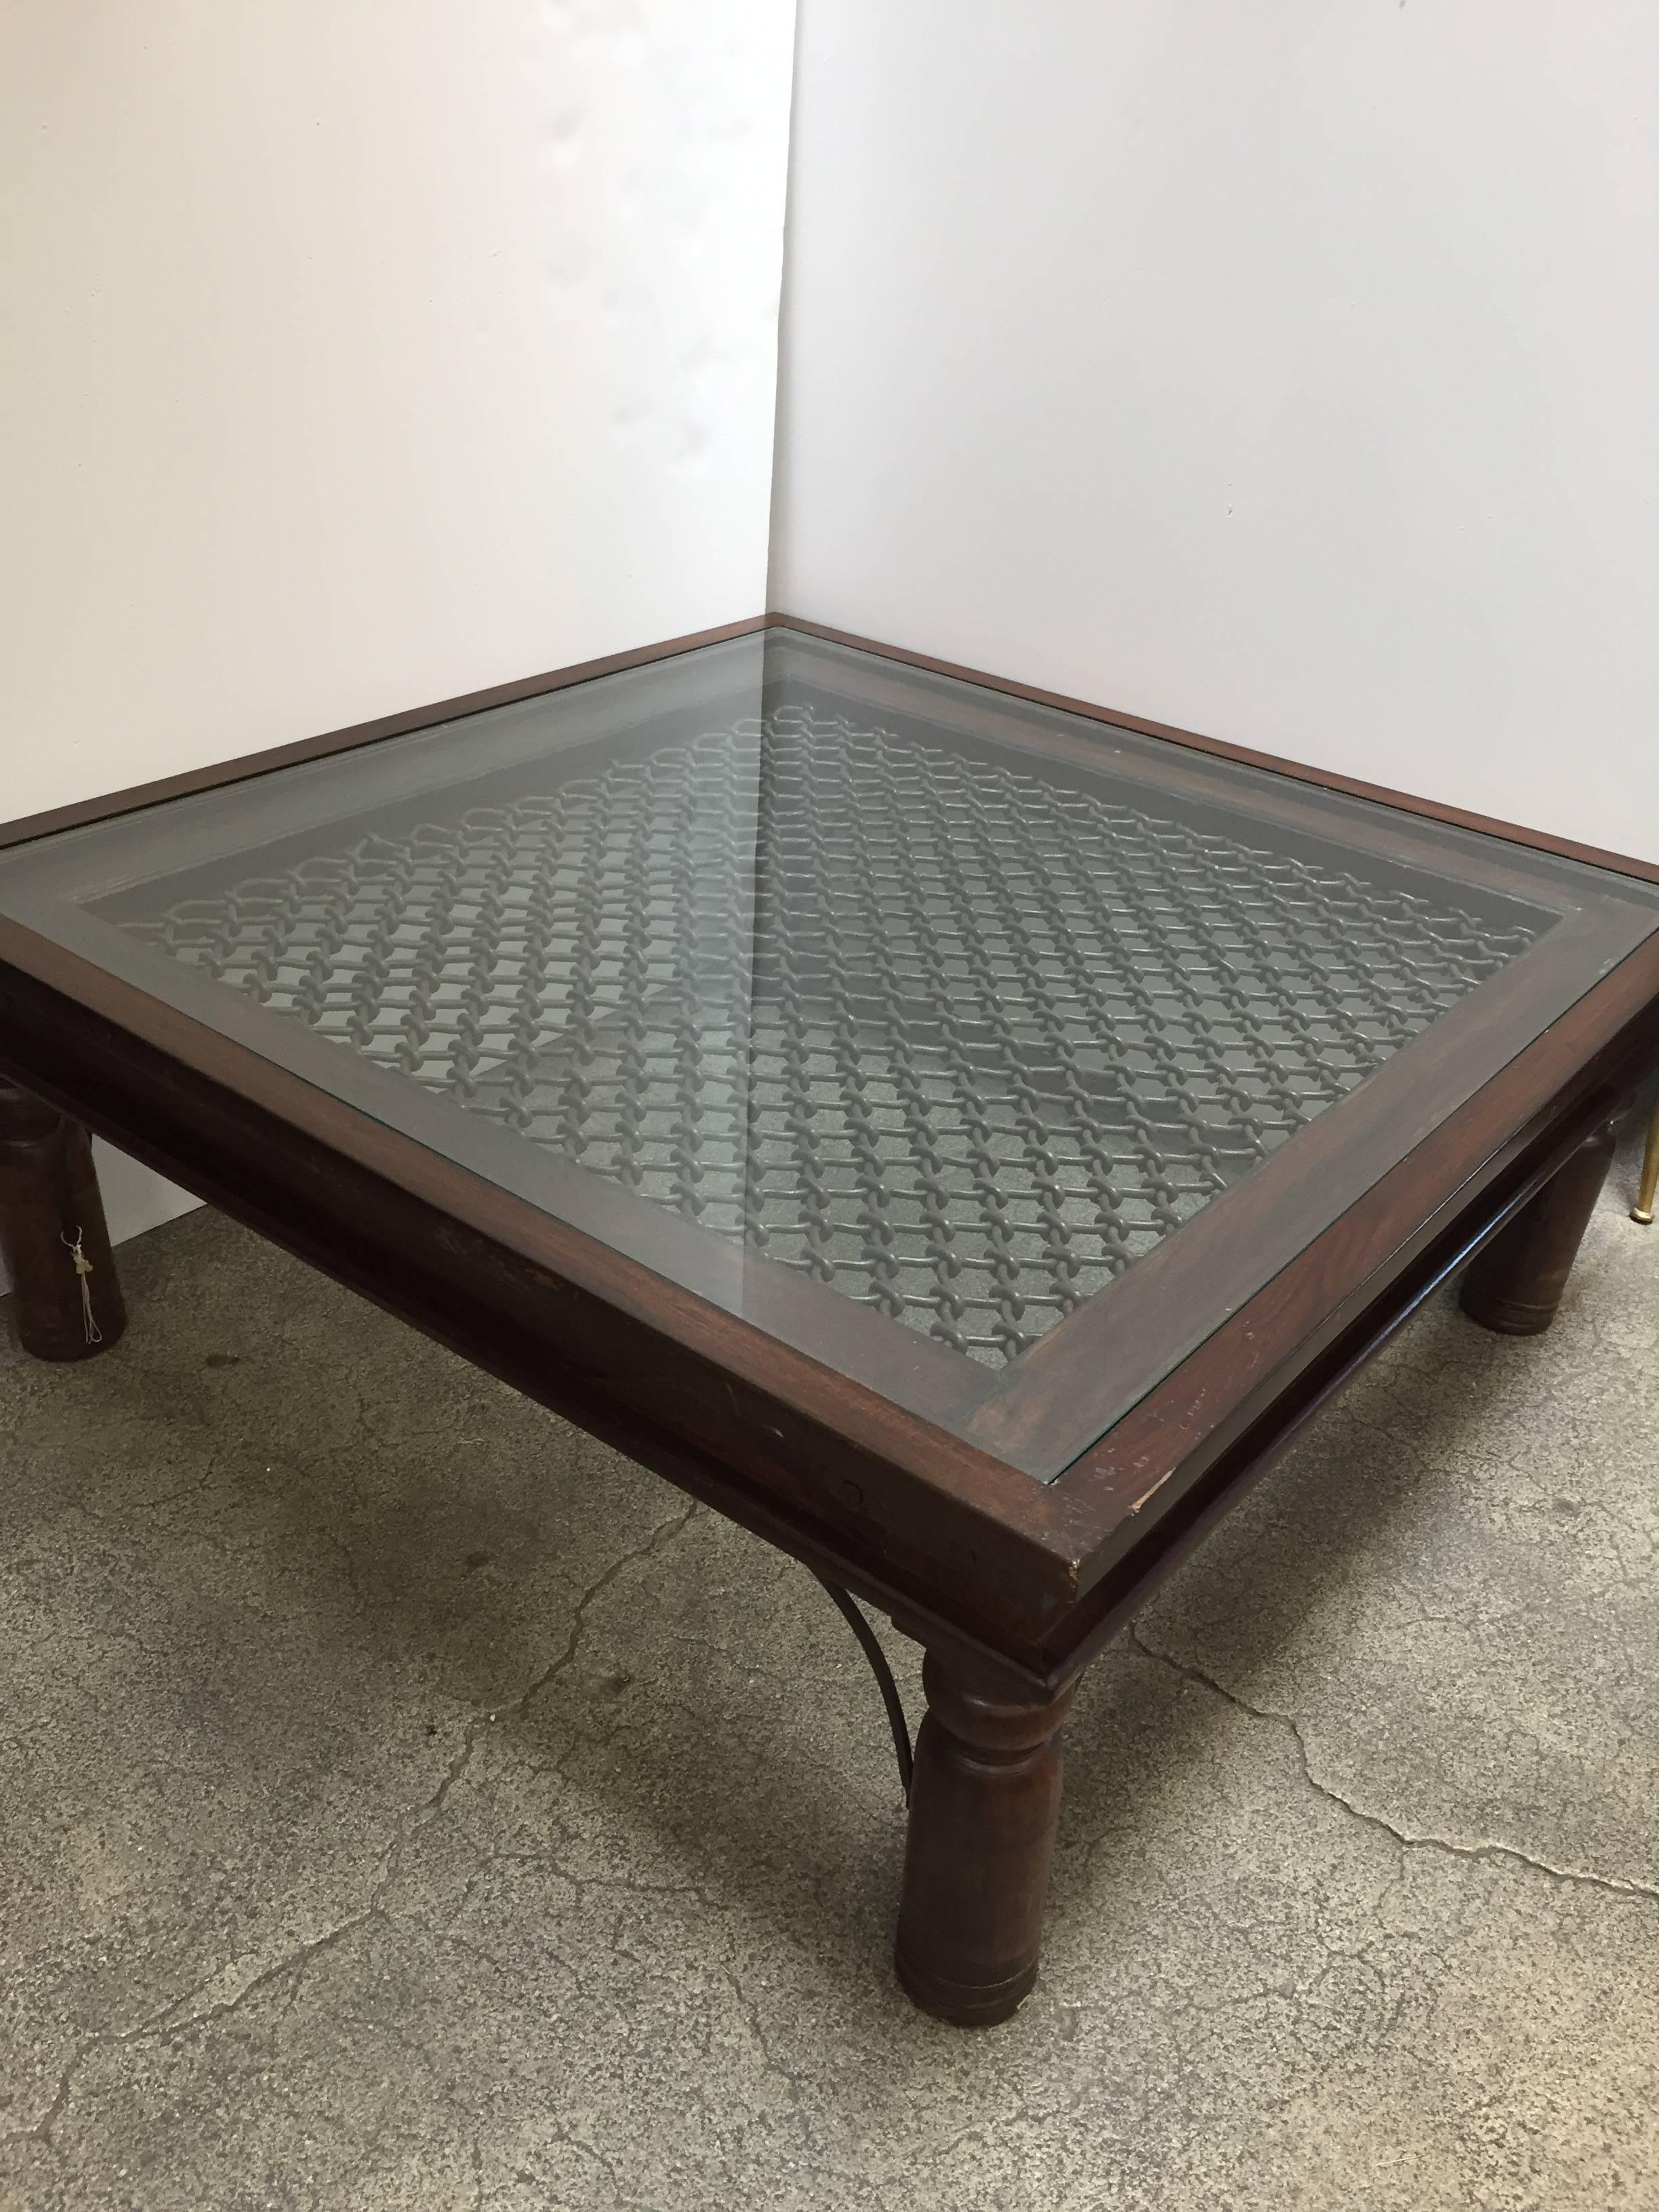 Anglo Indian style wooden coffee table with iron inset work and glass. 
Large coffee table in solid teak wood with nailheads and metal accents support, very nicely carved legs, sides and corners are reinforced with metal iron pieces. 
Spanish,